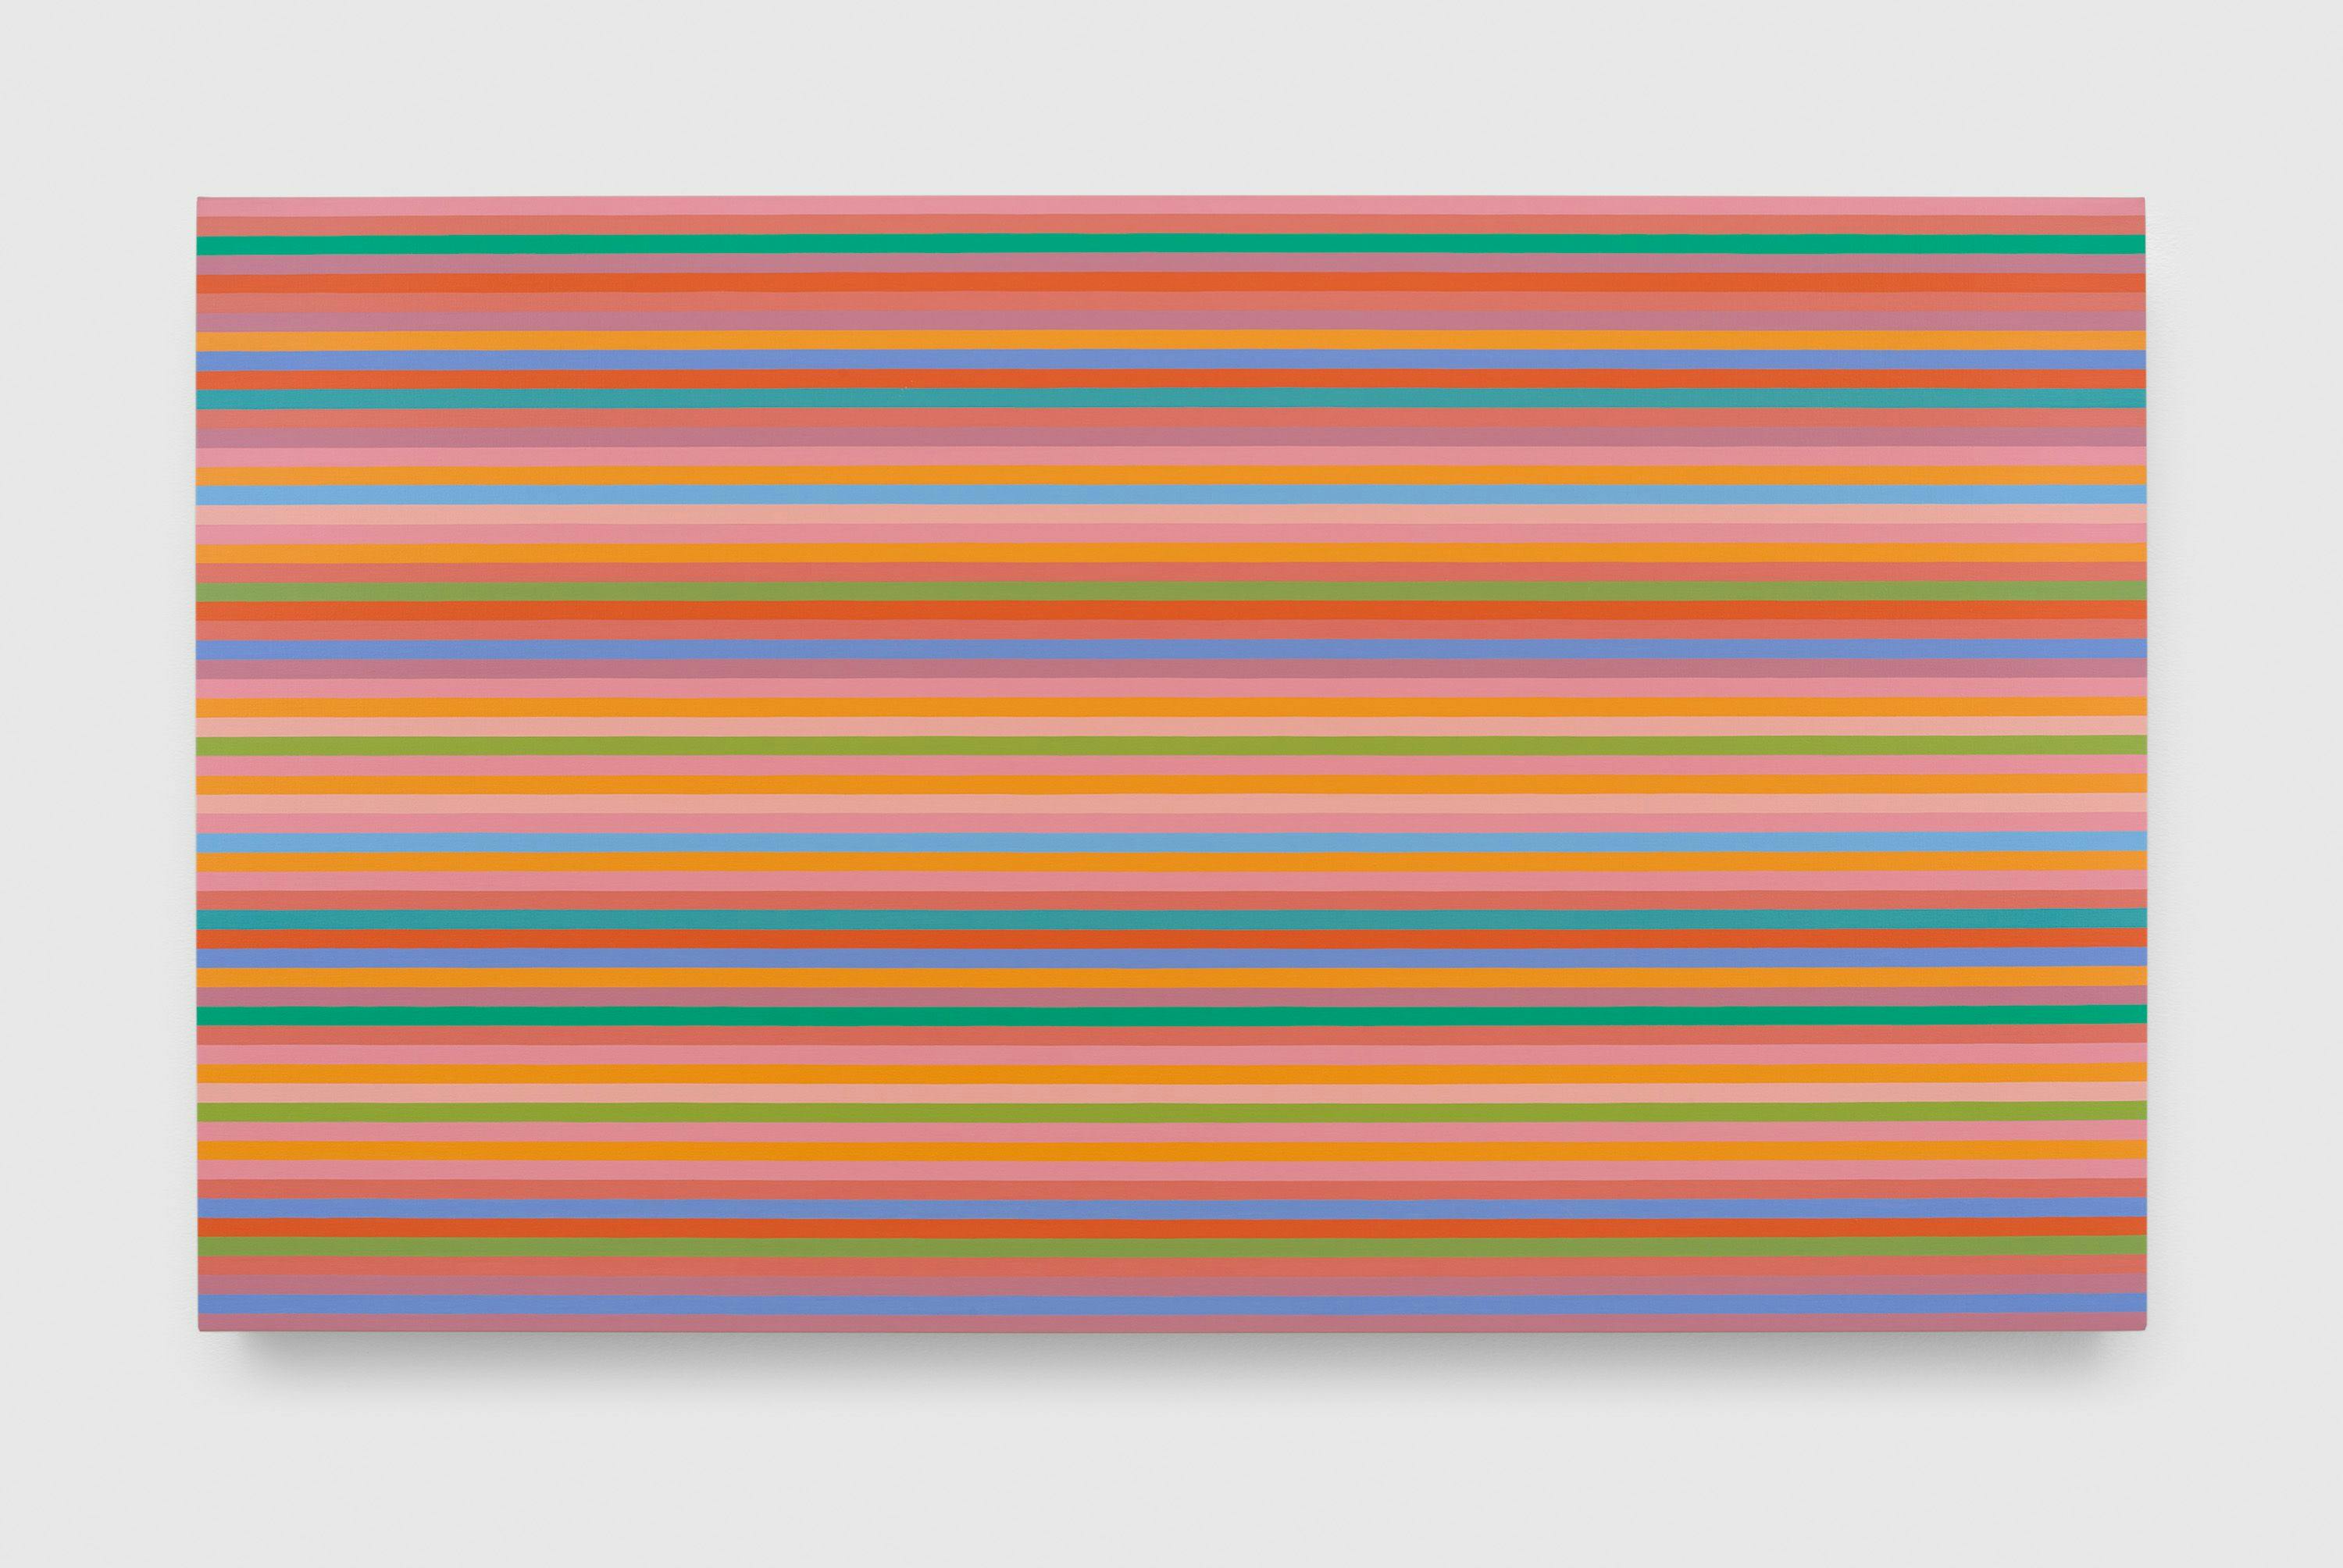 A painting by Bridget Riley, titled Arioso (Blue), dated 2013.